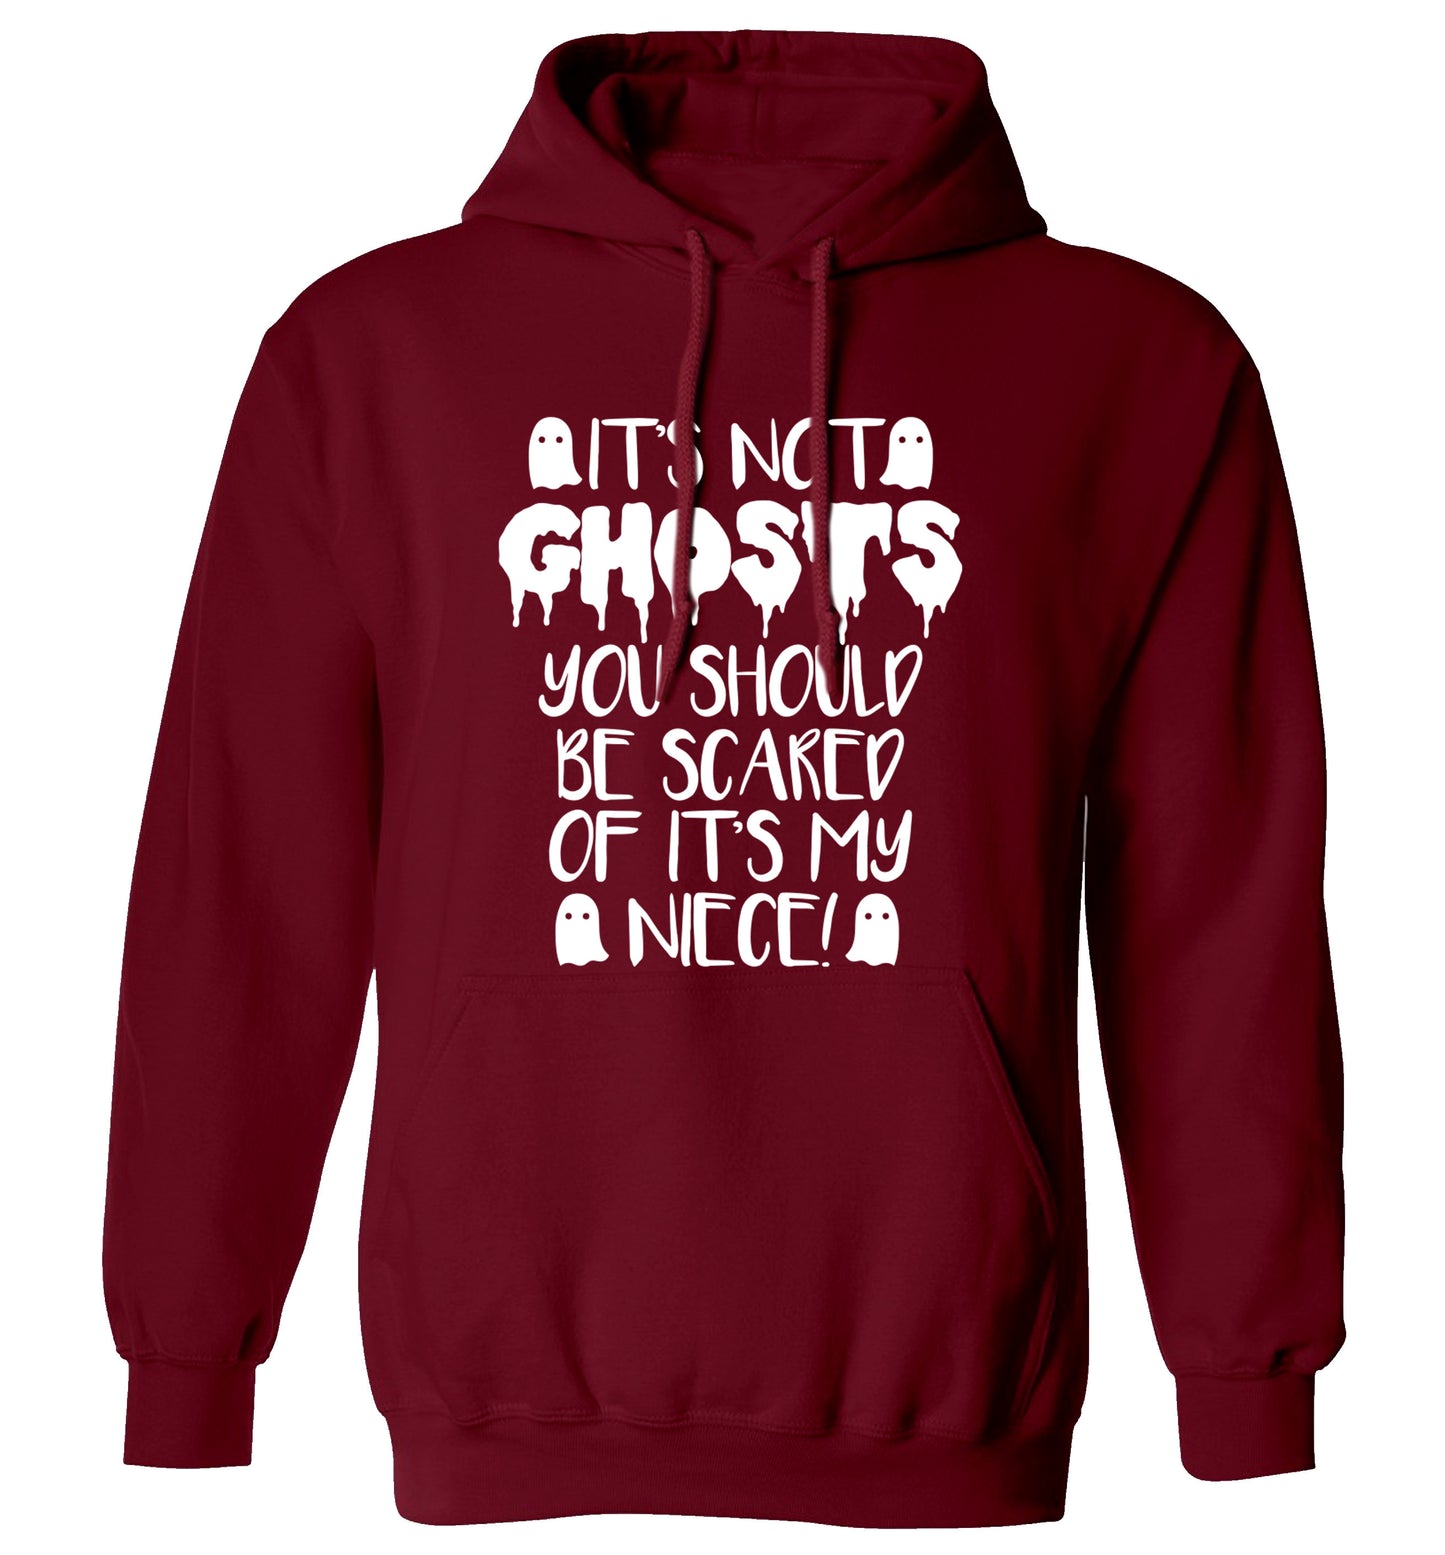 It's not ghosts you should be scared of it's my niece! adults unisex maroon hoodie 2XL